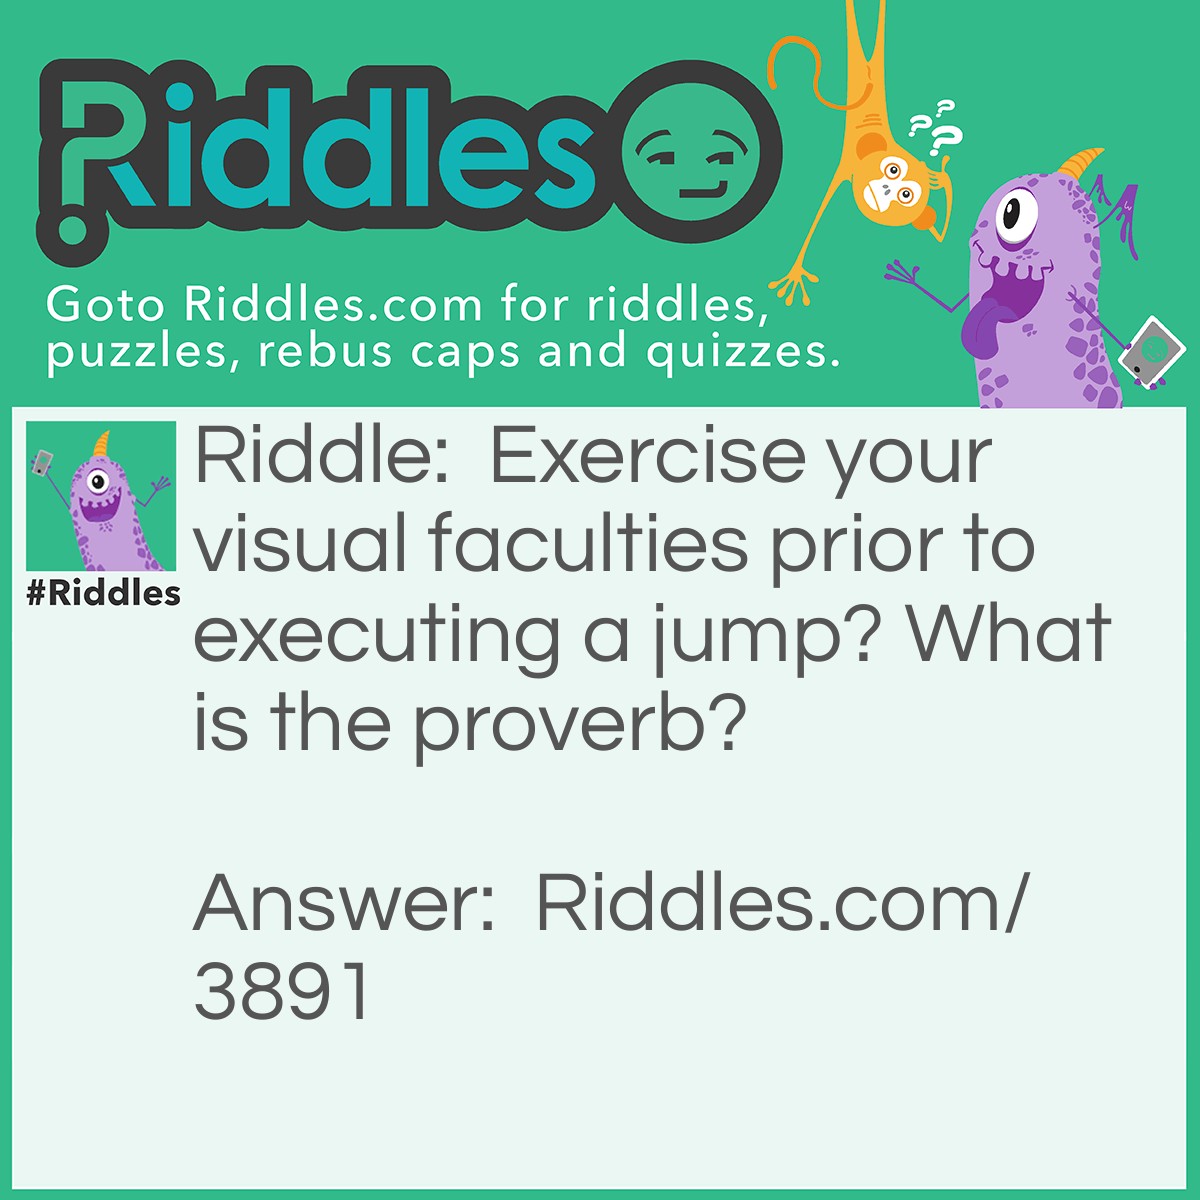 Riddle: Exercise your visual faculties prior to executing a jump? What is the proverb? Answer: Look before you leap.